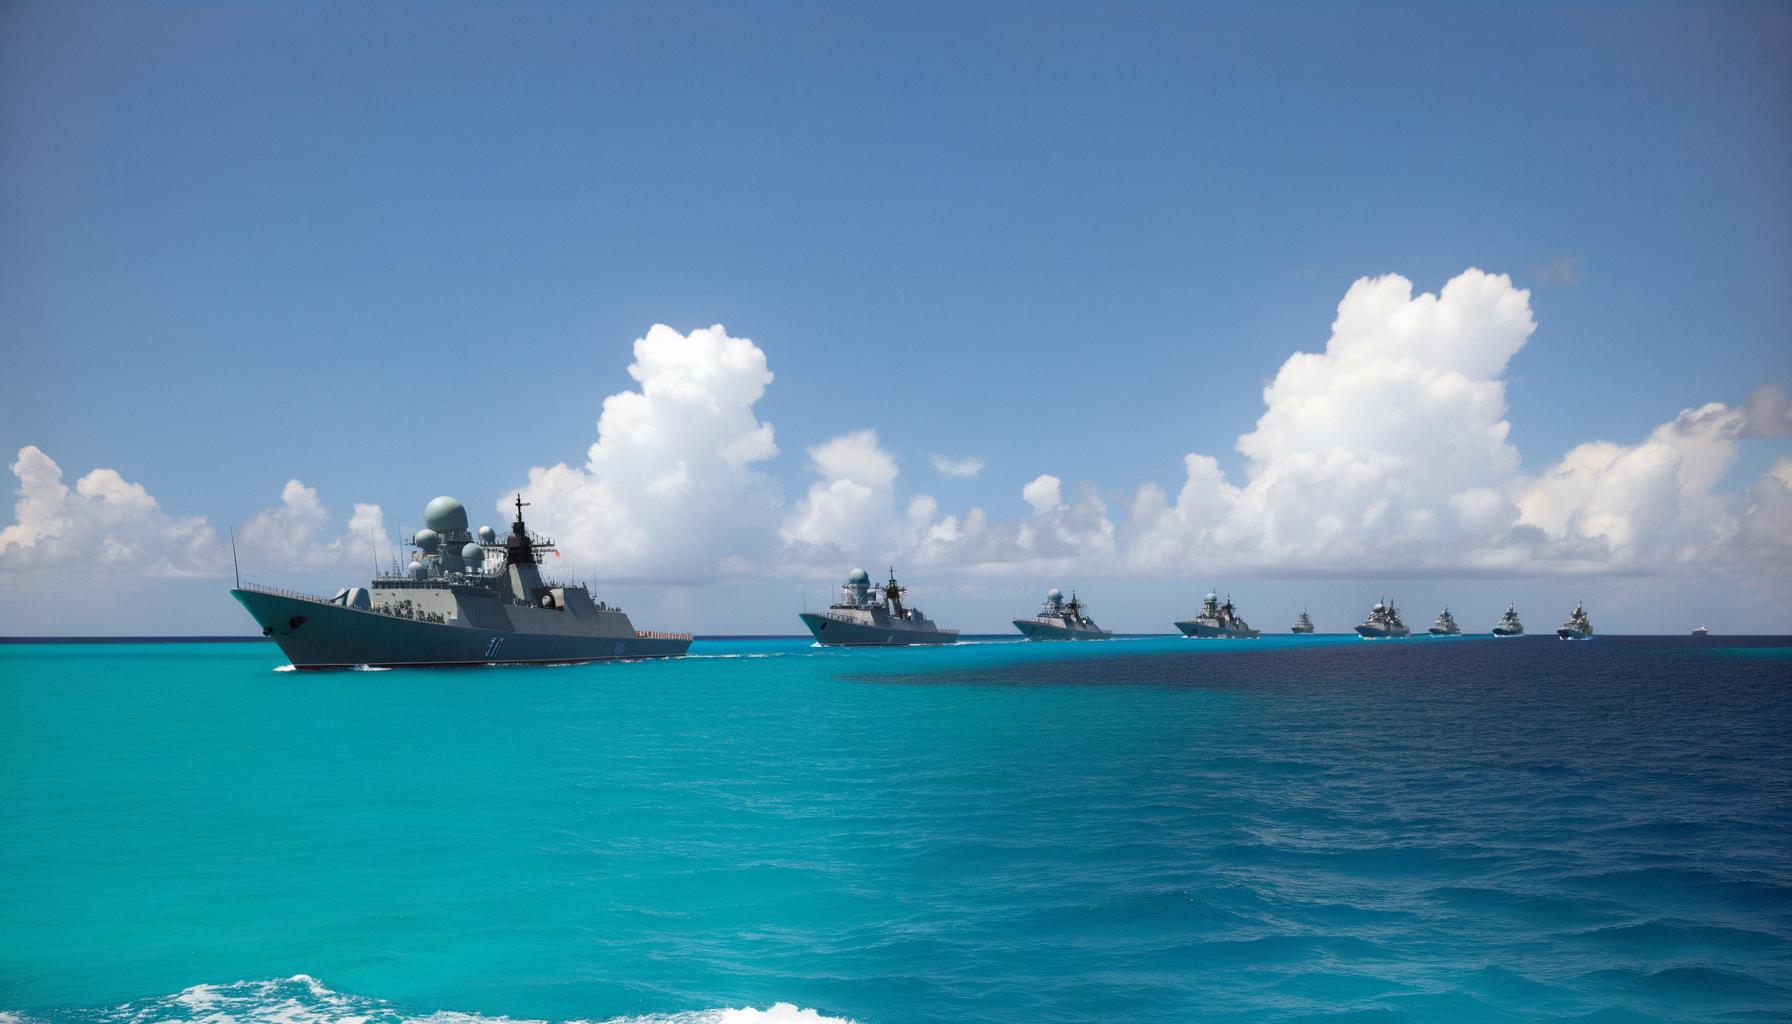 Russian warships arrive in Caribbean amid geopolitical tensions.